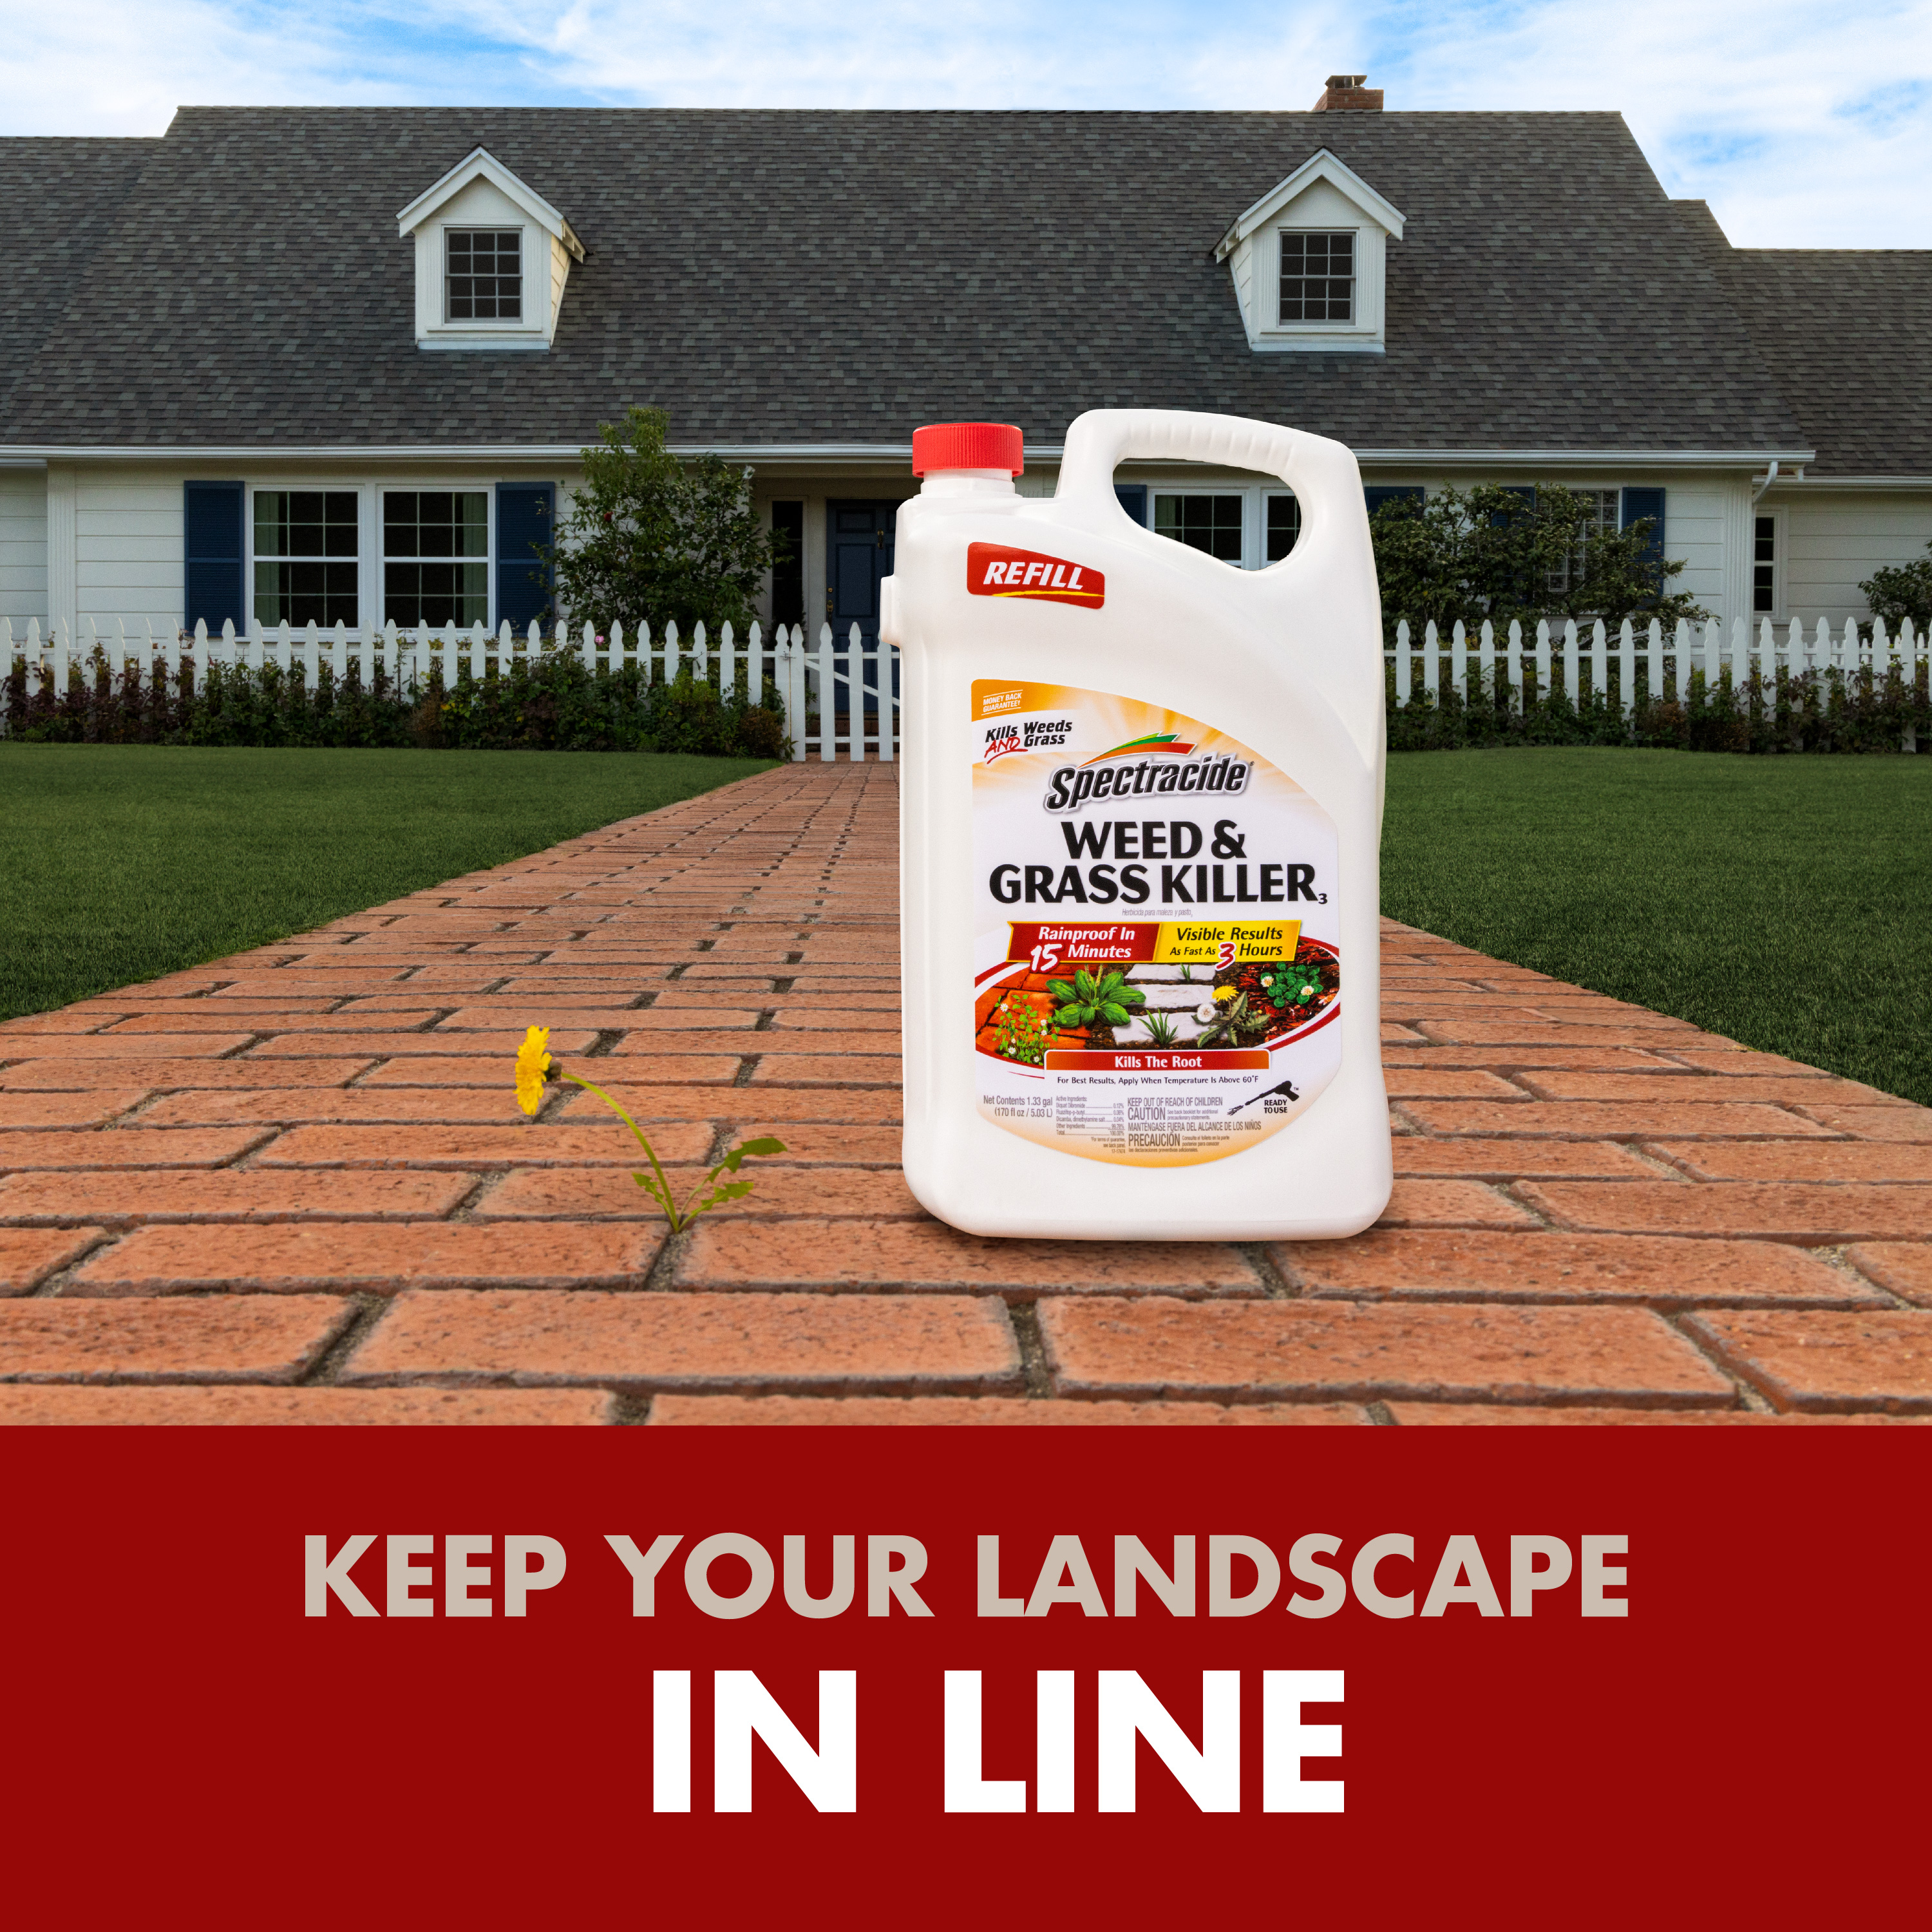 Spectracide Weed & Grass Killer (Refill), Use on Driveways, Walkways and Around Trees and Flower Beds, 1.3 Gallon - image 11 of 13